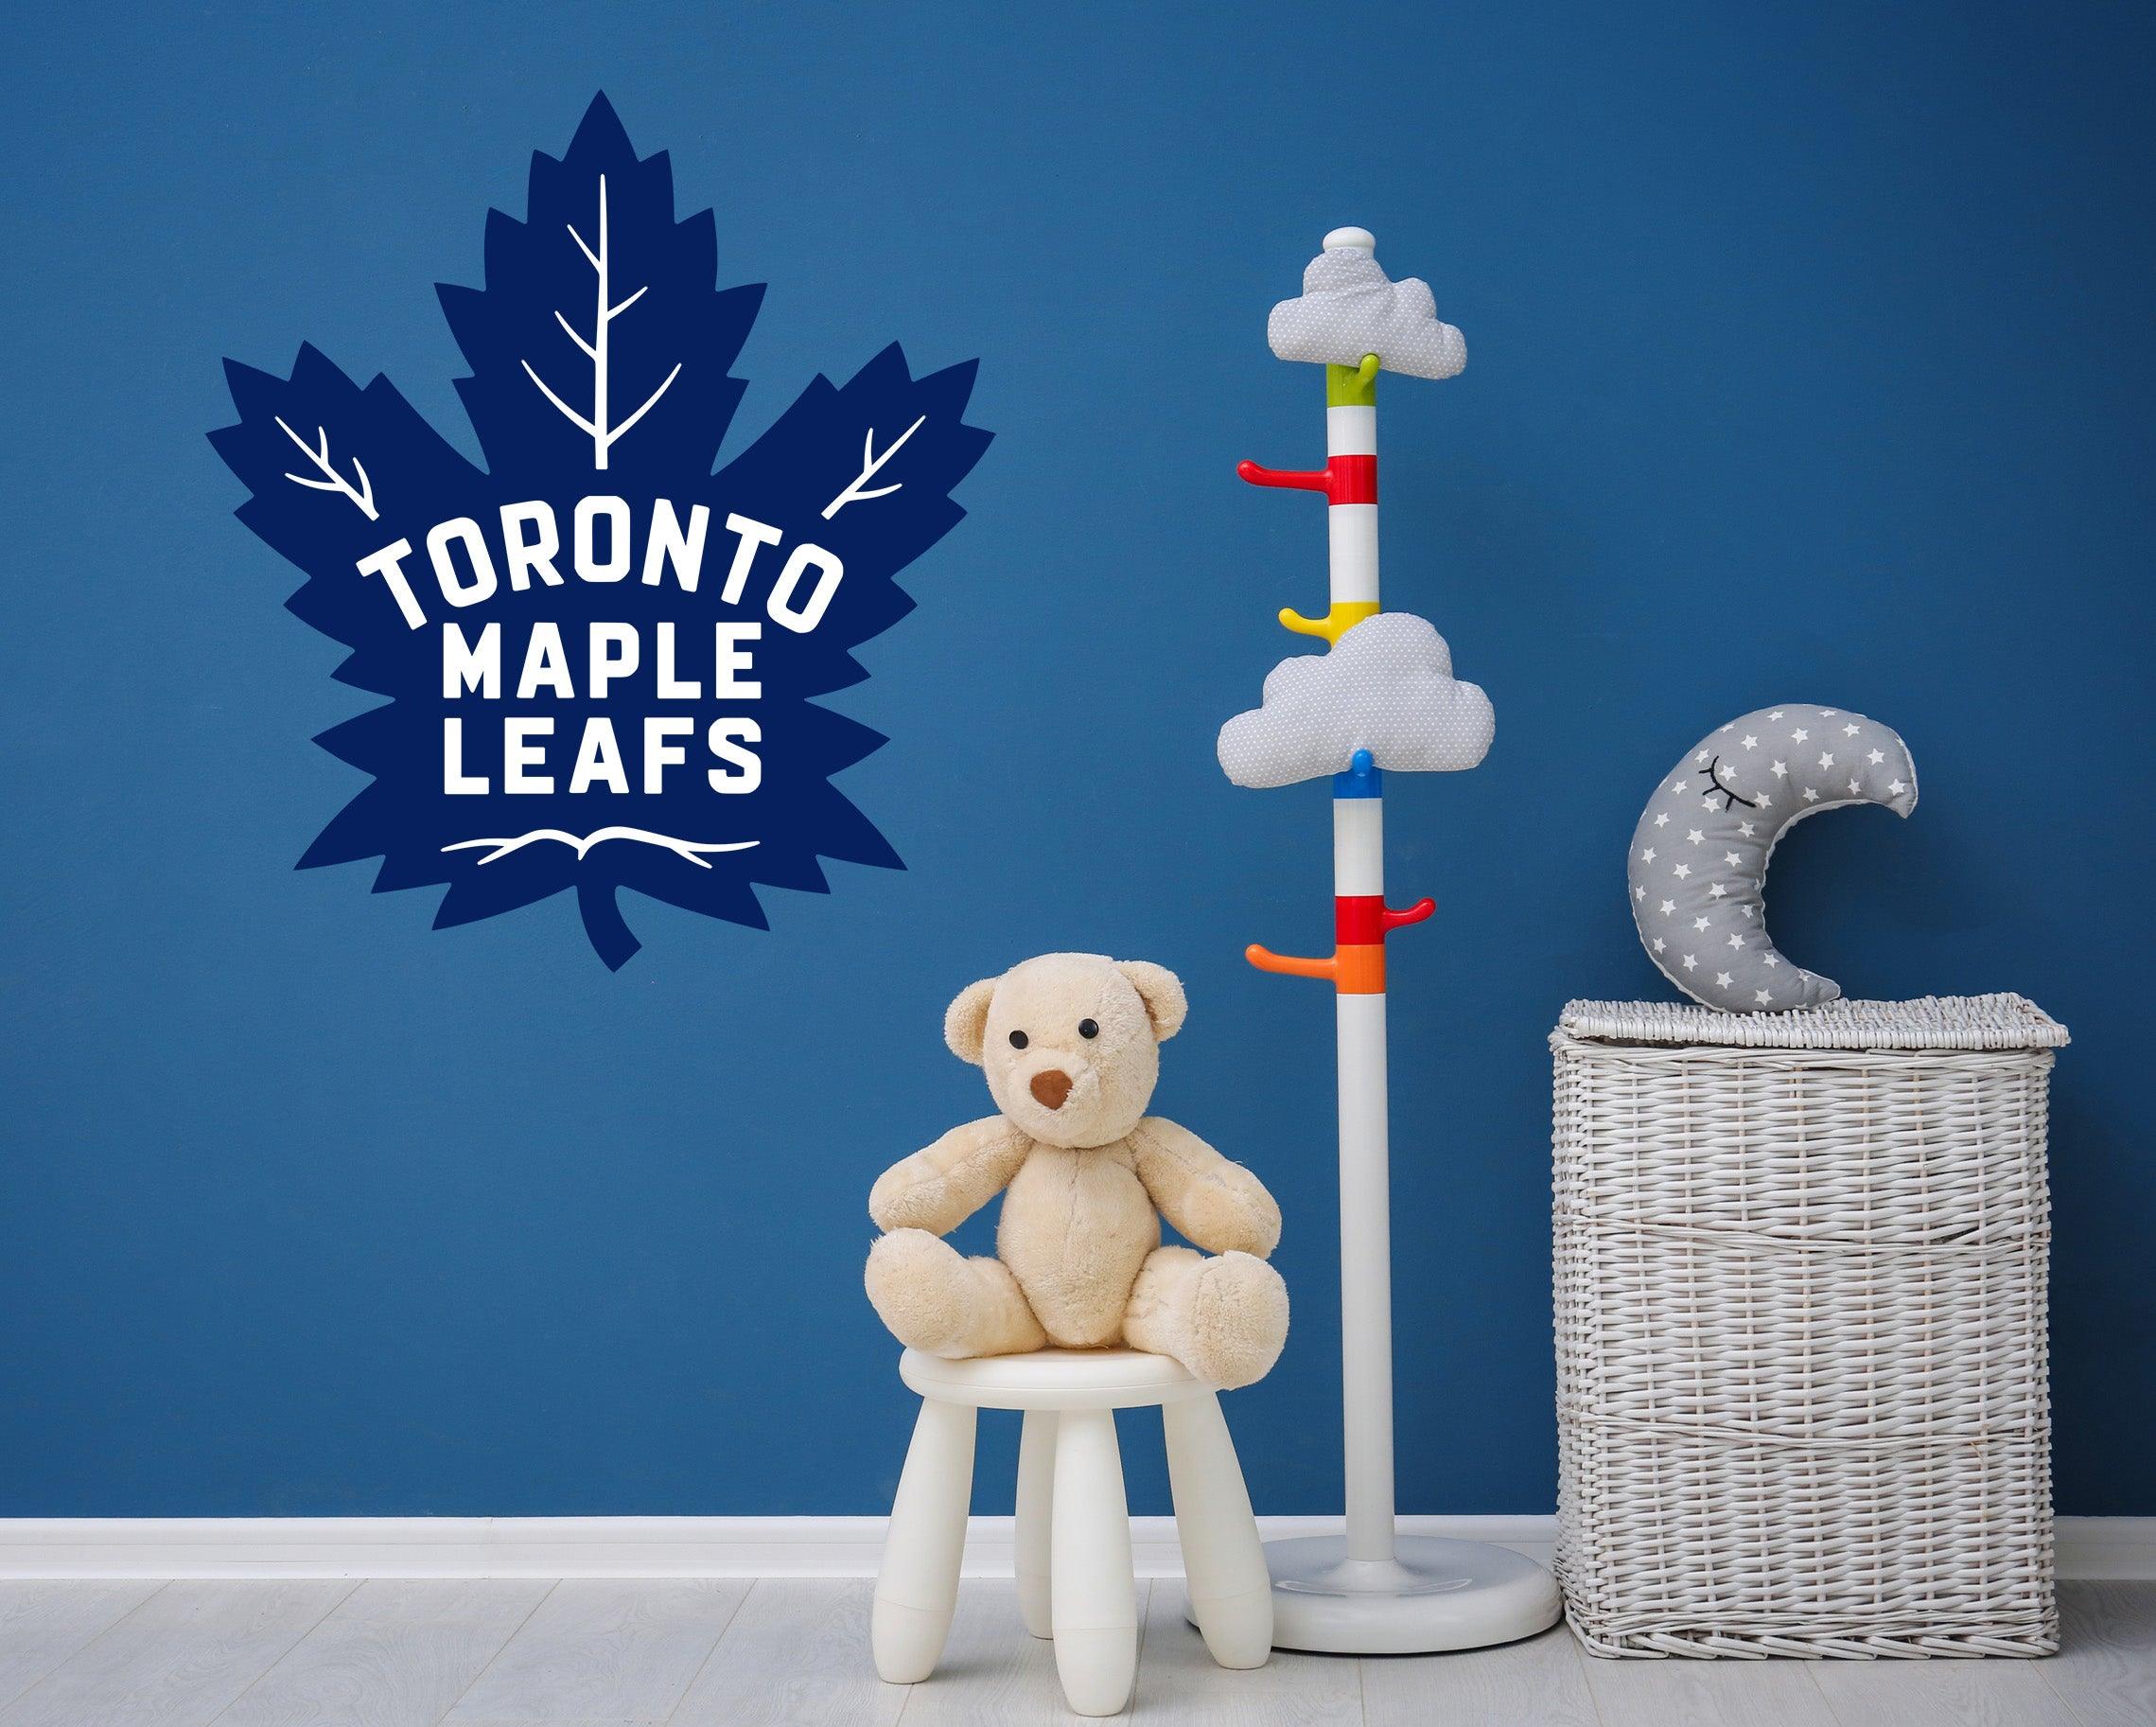 CoolWalls.ca Sports Copy of Maple Leafs Vintage Logo, Peel and Stick wall Decal. Peel-N-Stick, Removable